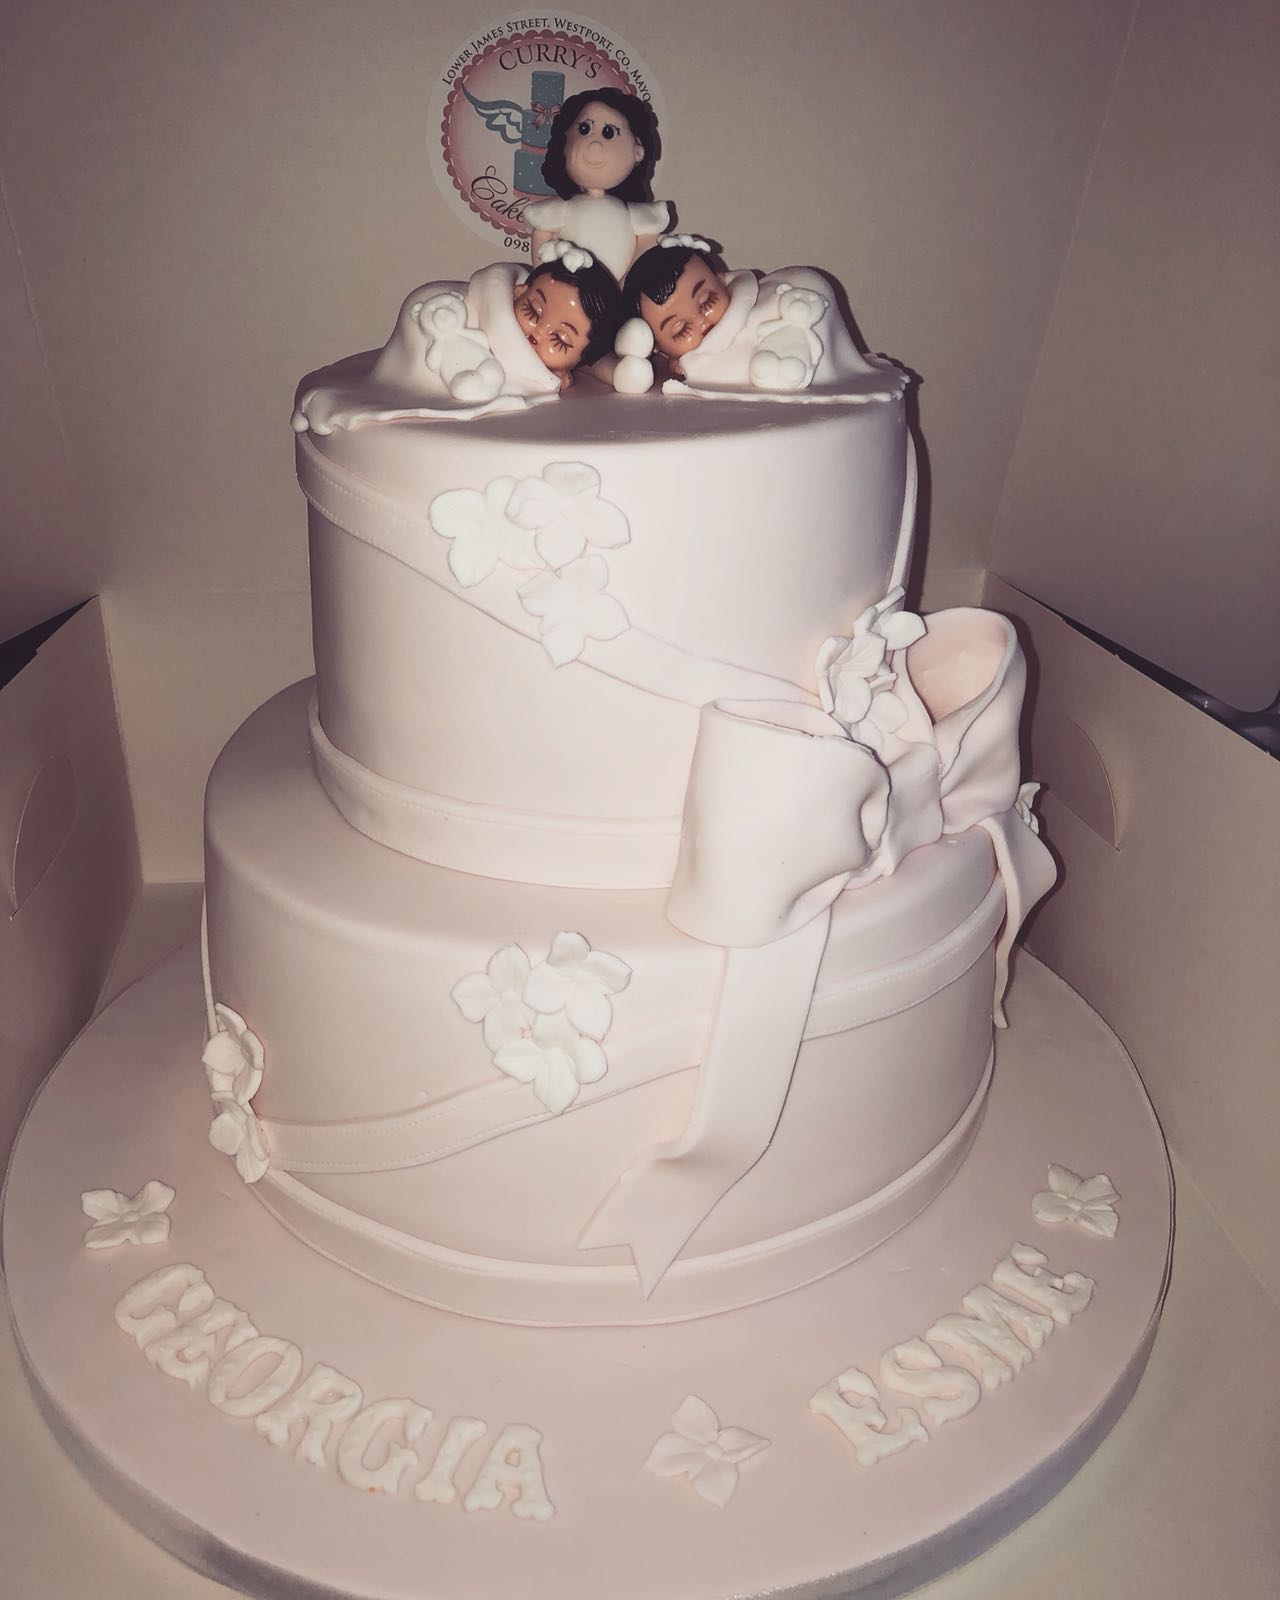 Twins christening cakes